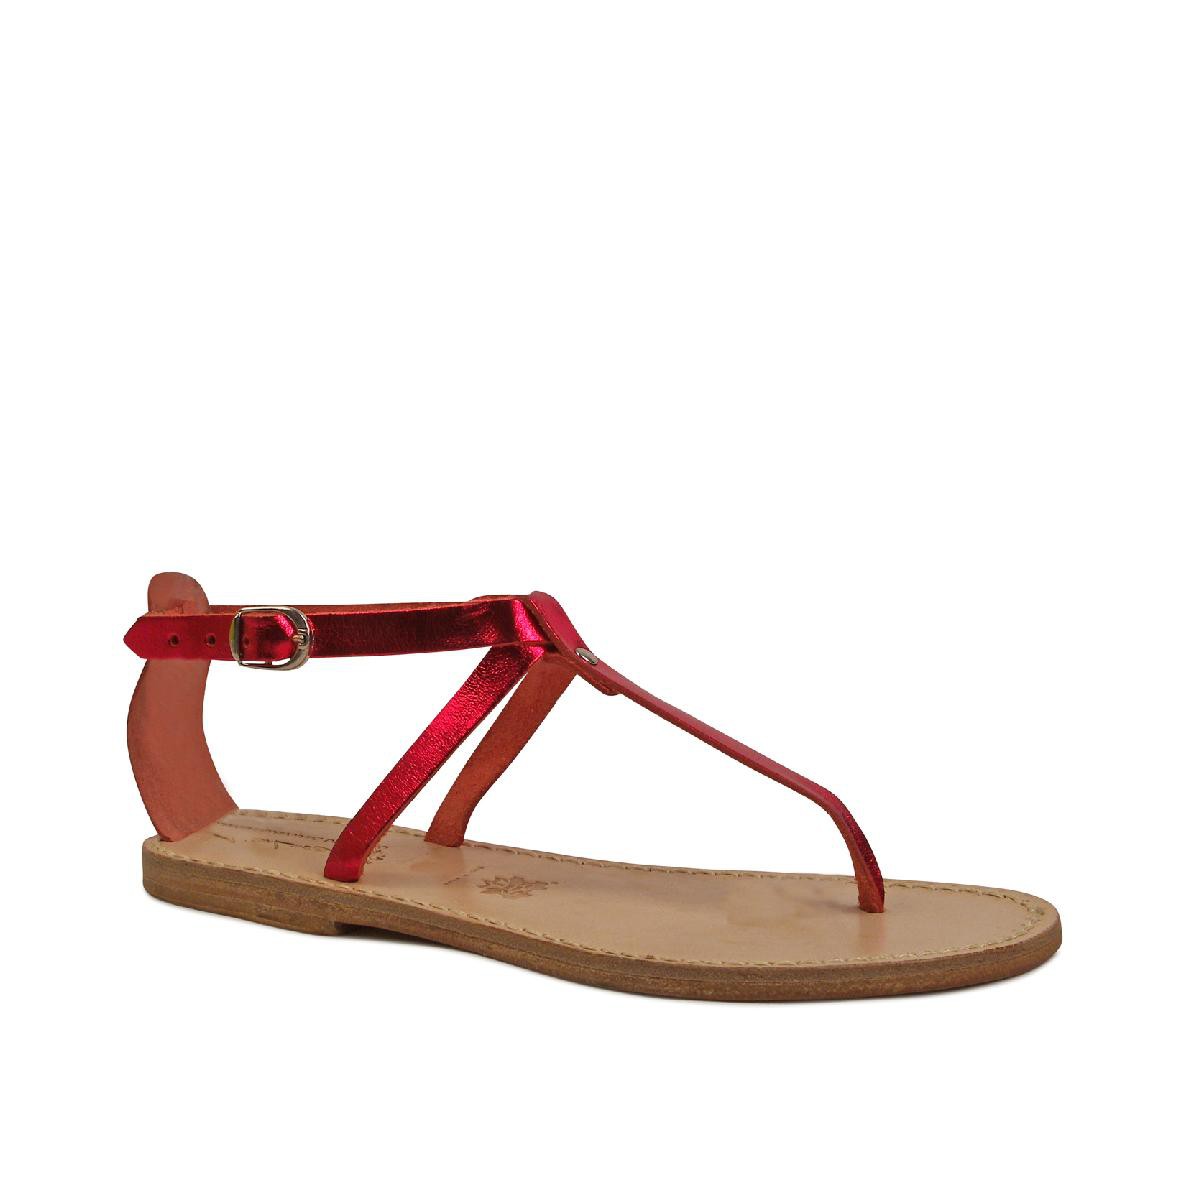 Handmade t-strap sandals in red laminated leather | Gianluca - The ...